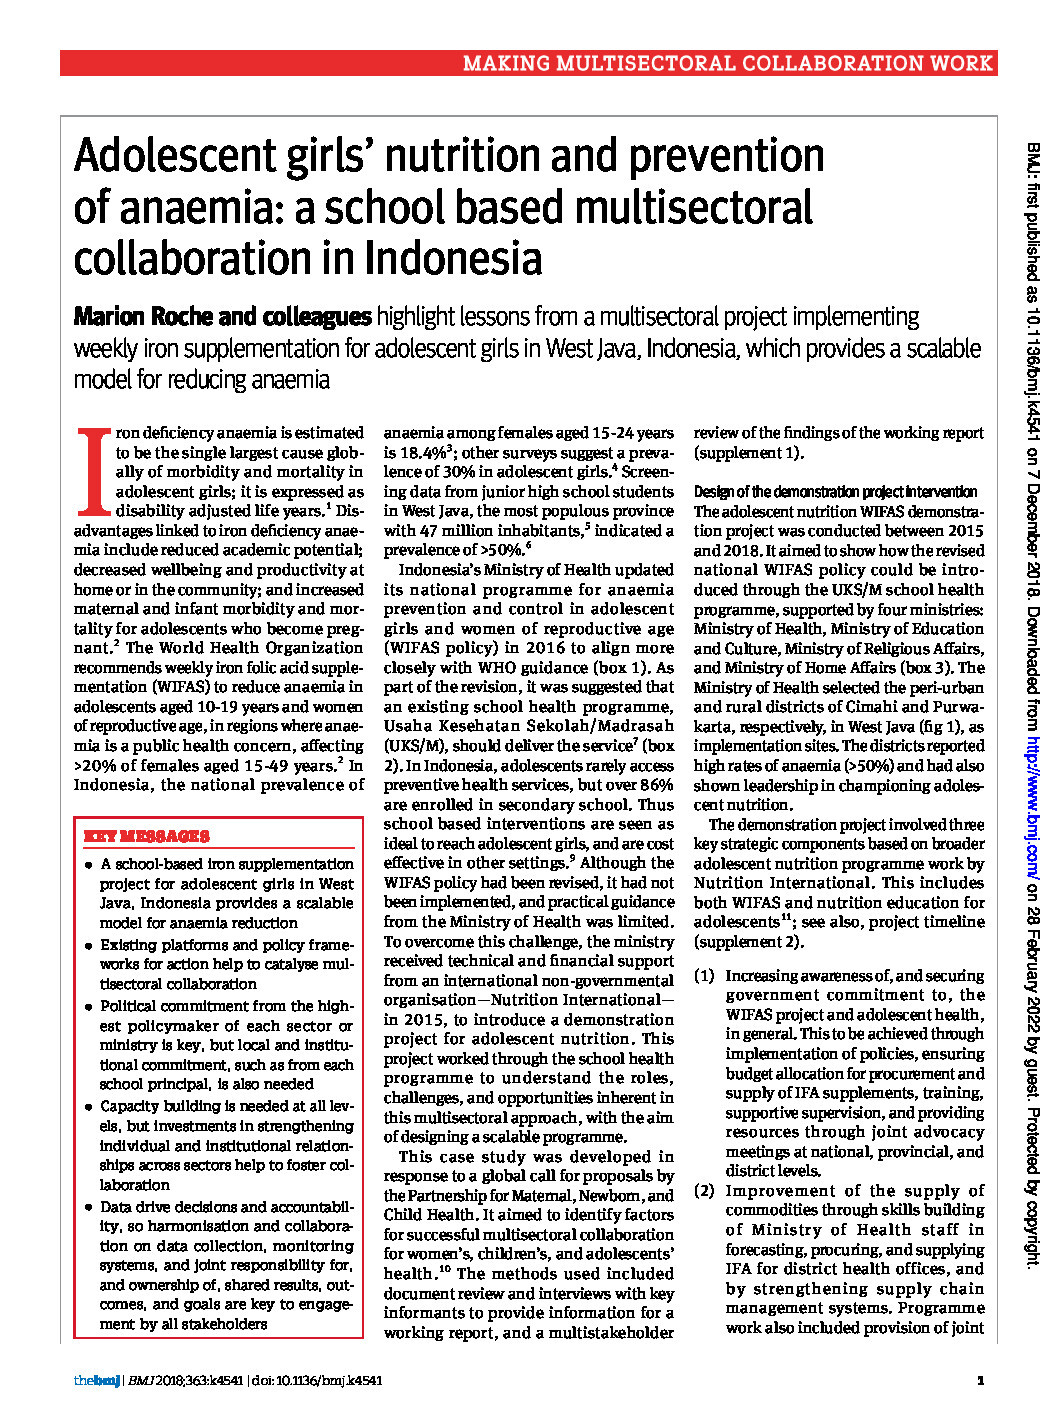 Adolescent girls’ nutrition and anaemia prevention: a school-based multi-sectoral collaboration in Indonesia thumbnail